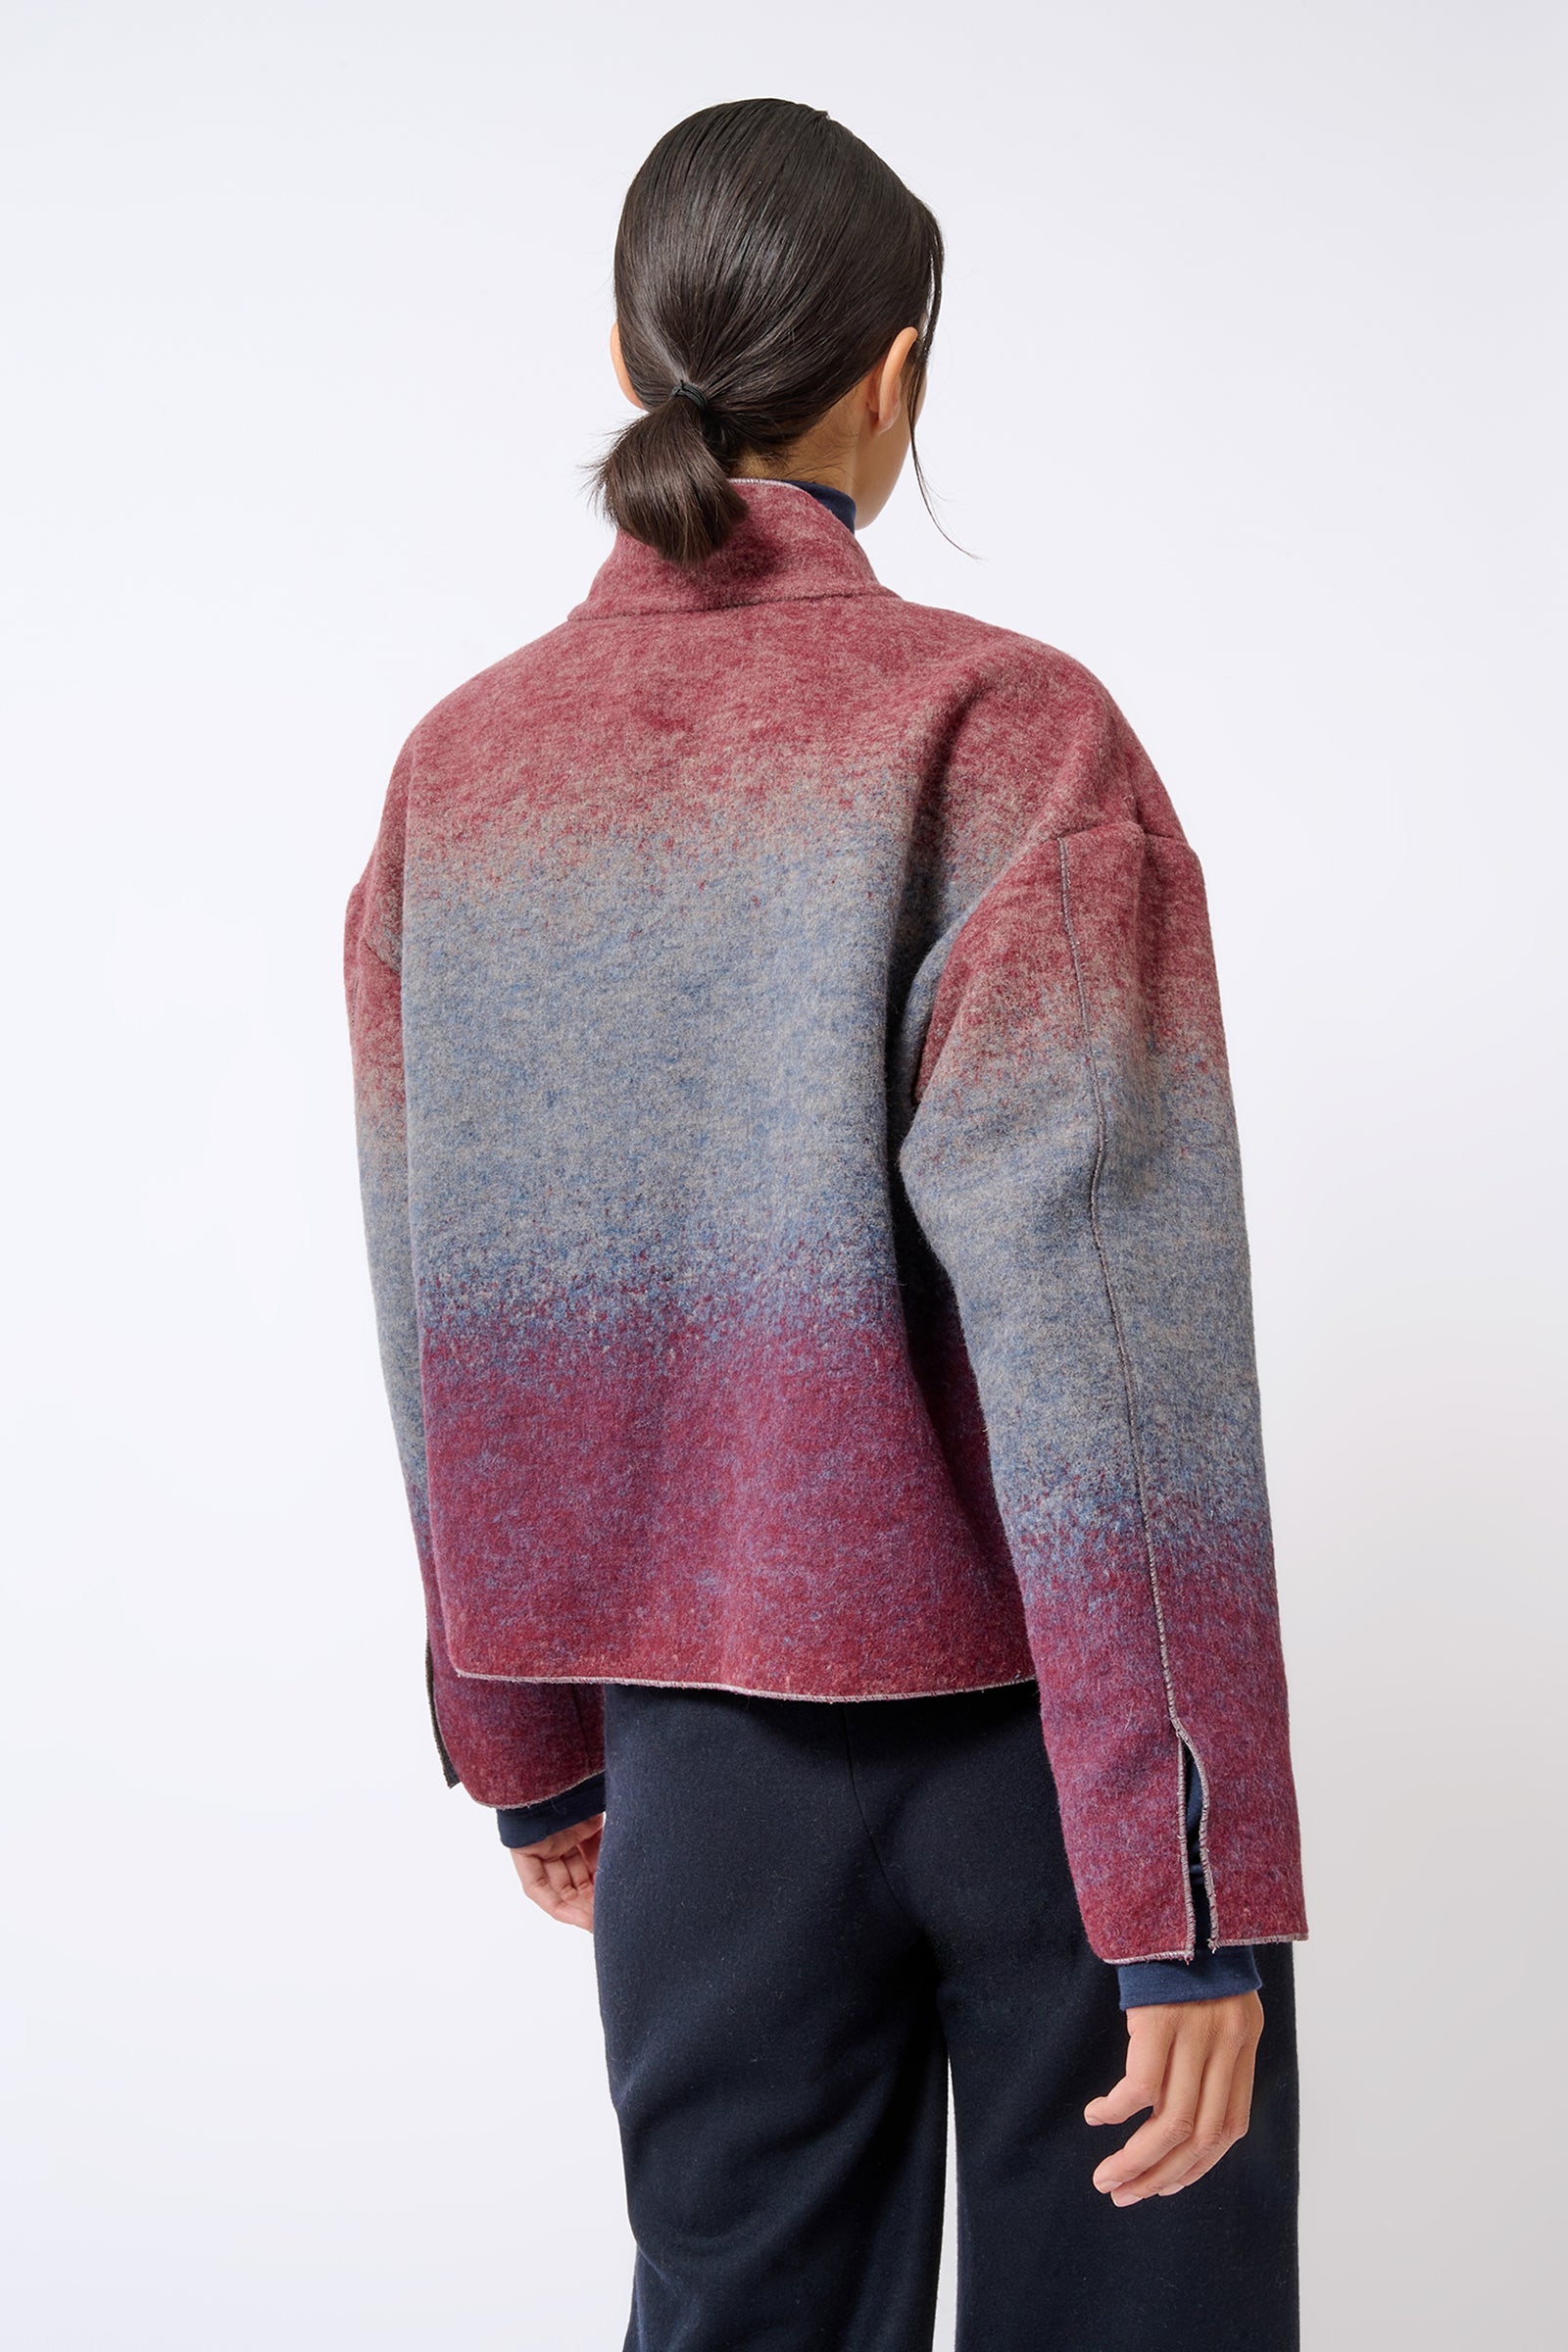 Kal Rieman Kasey Ombre Bomber in Ombre on Model Back View